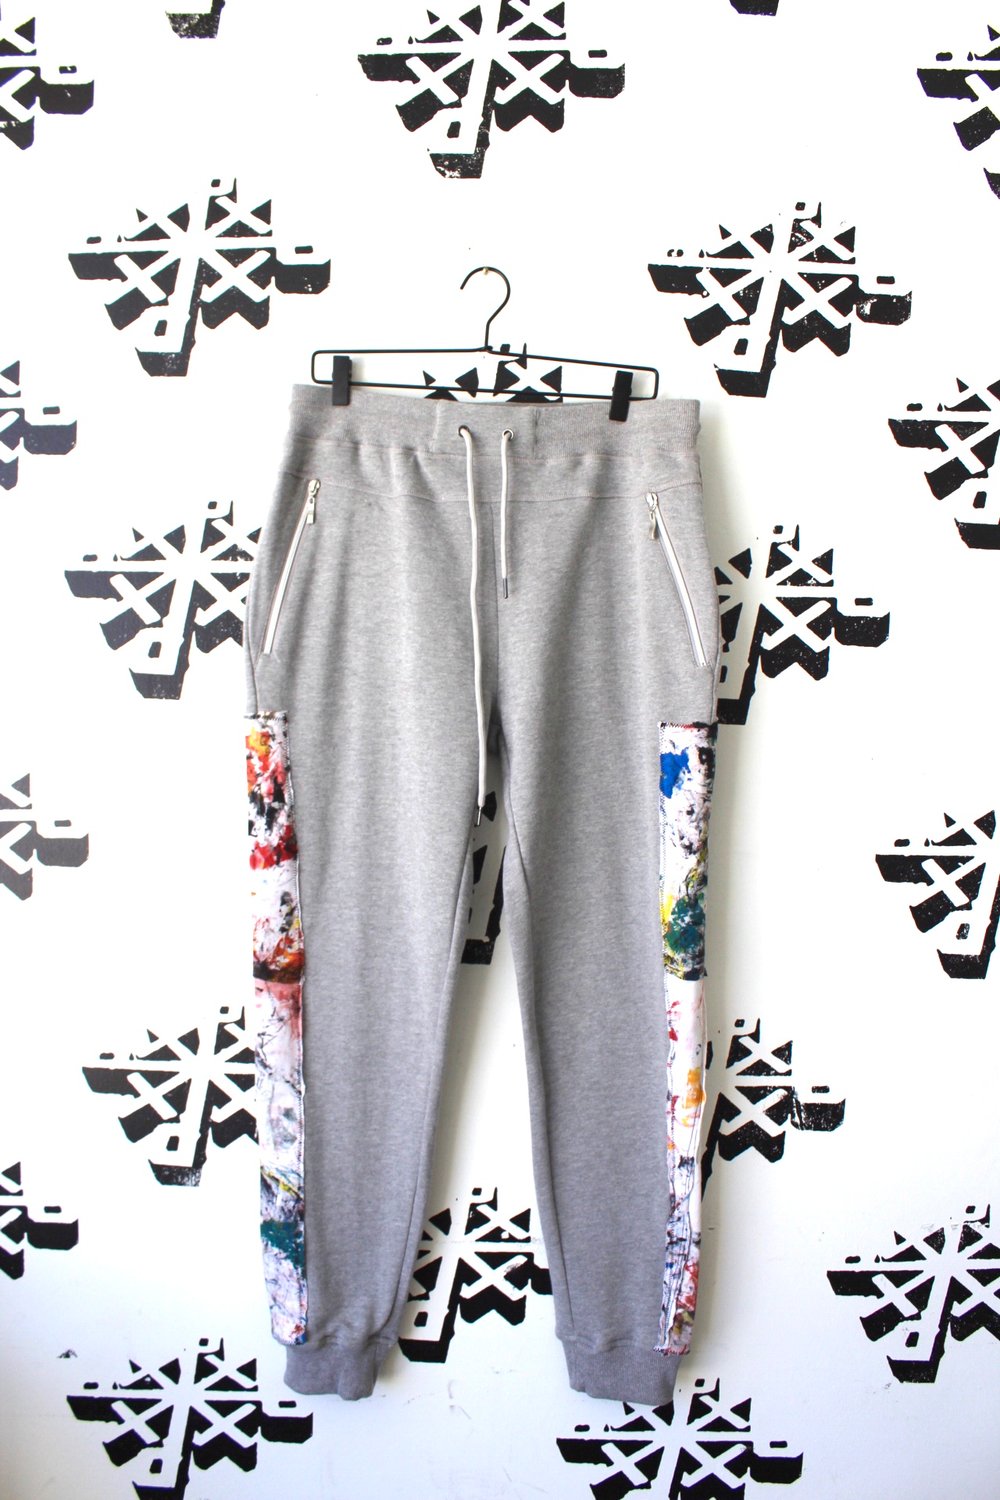 clean up nice sweatpants in gray 